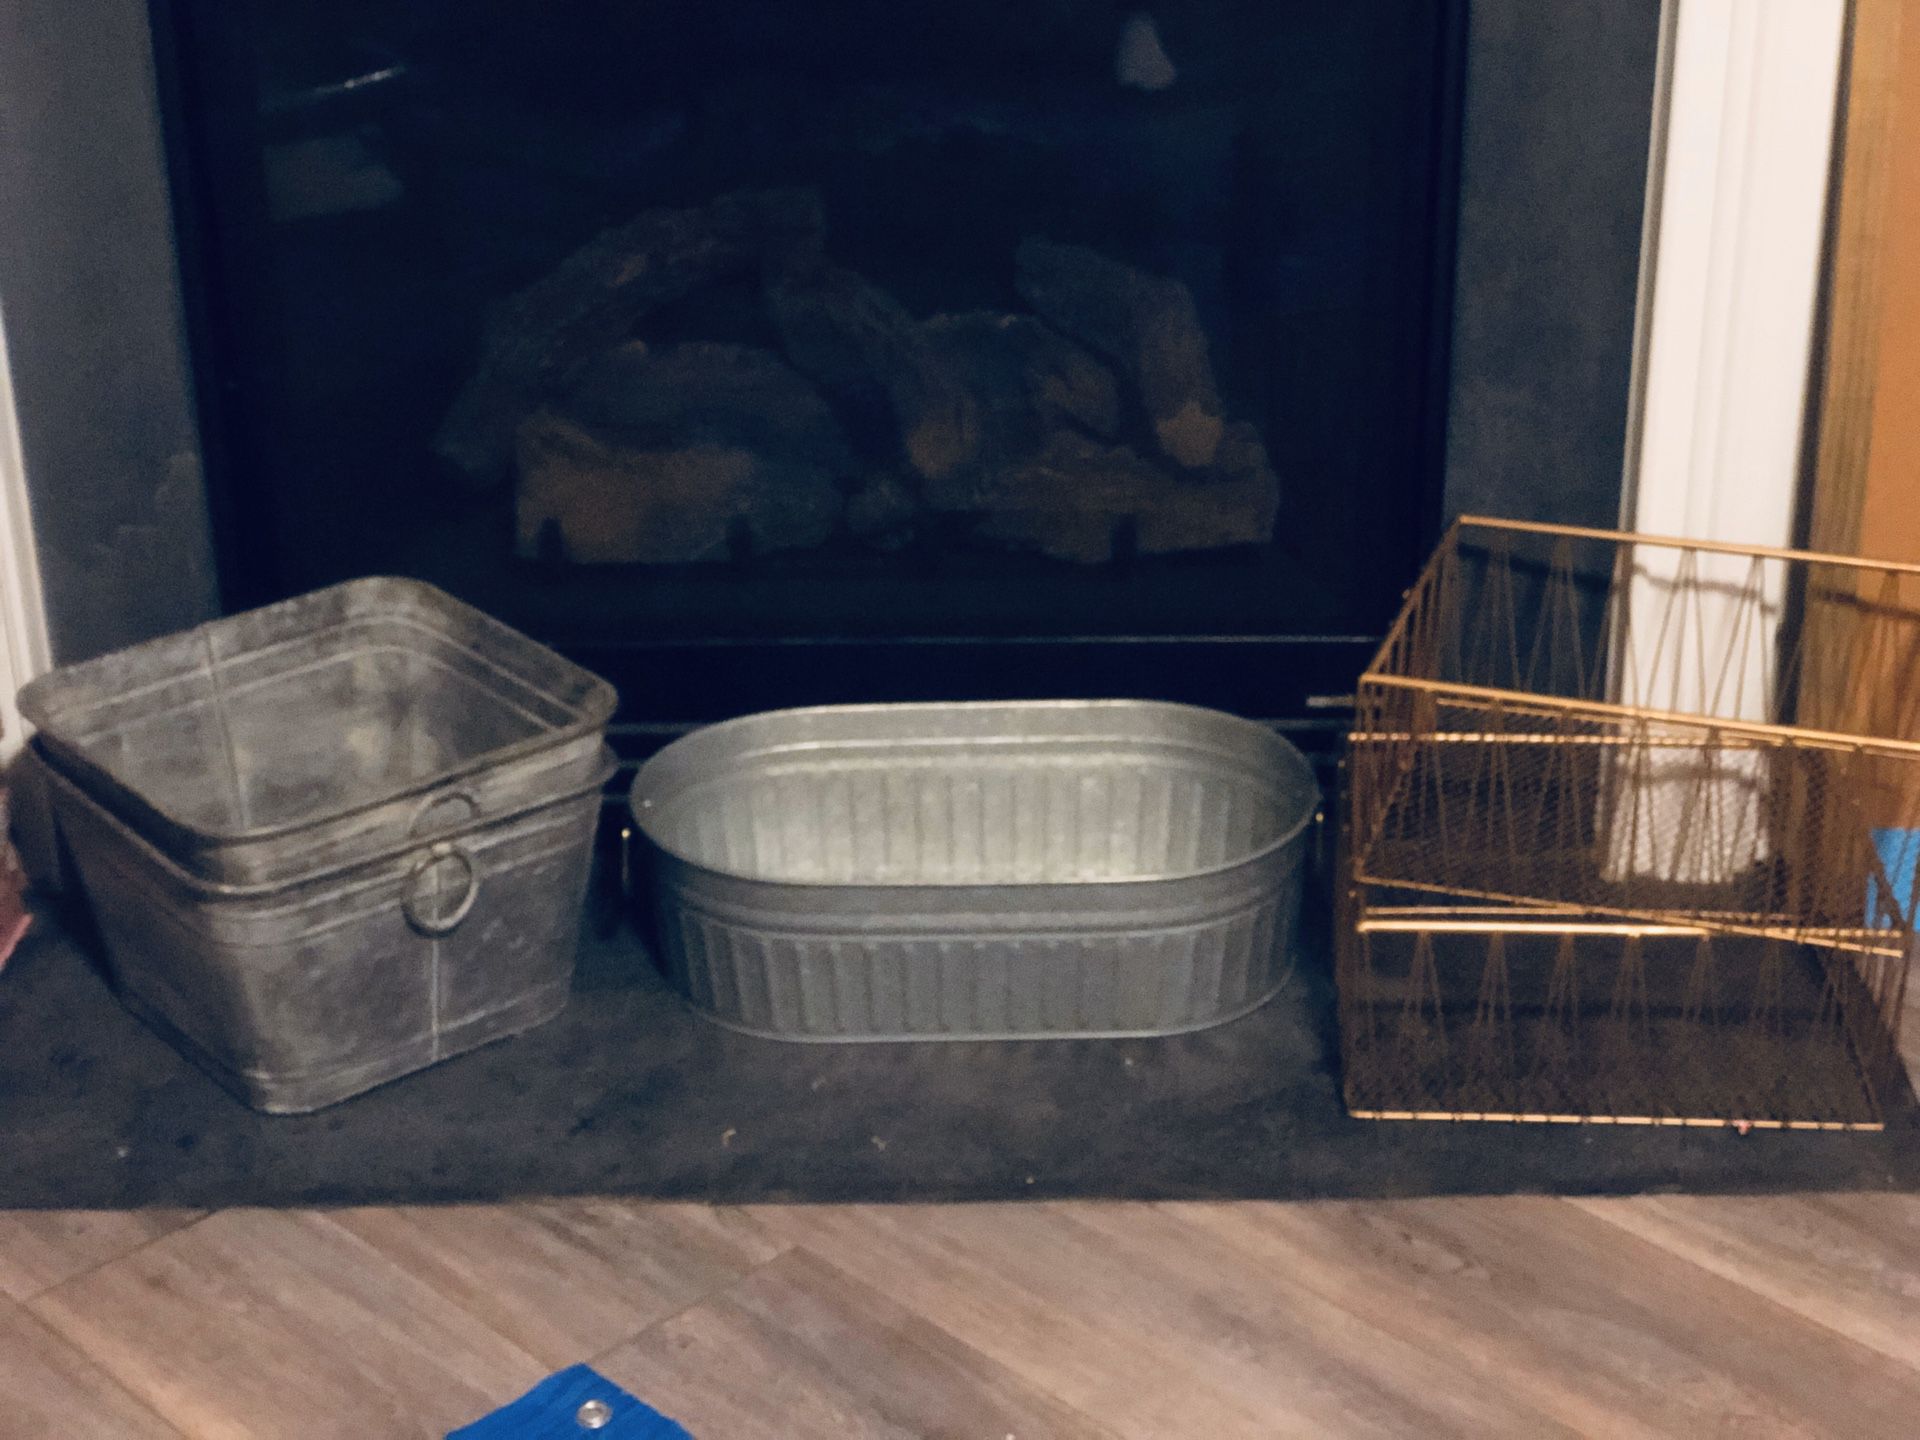 Baskets/Storage Containers